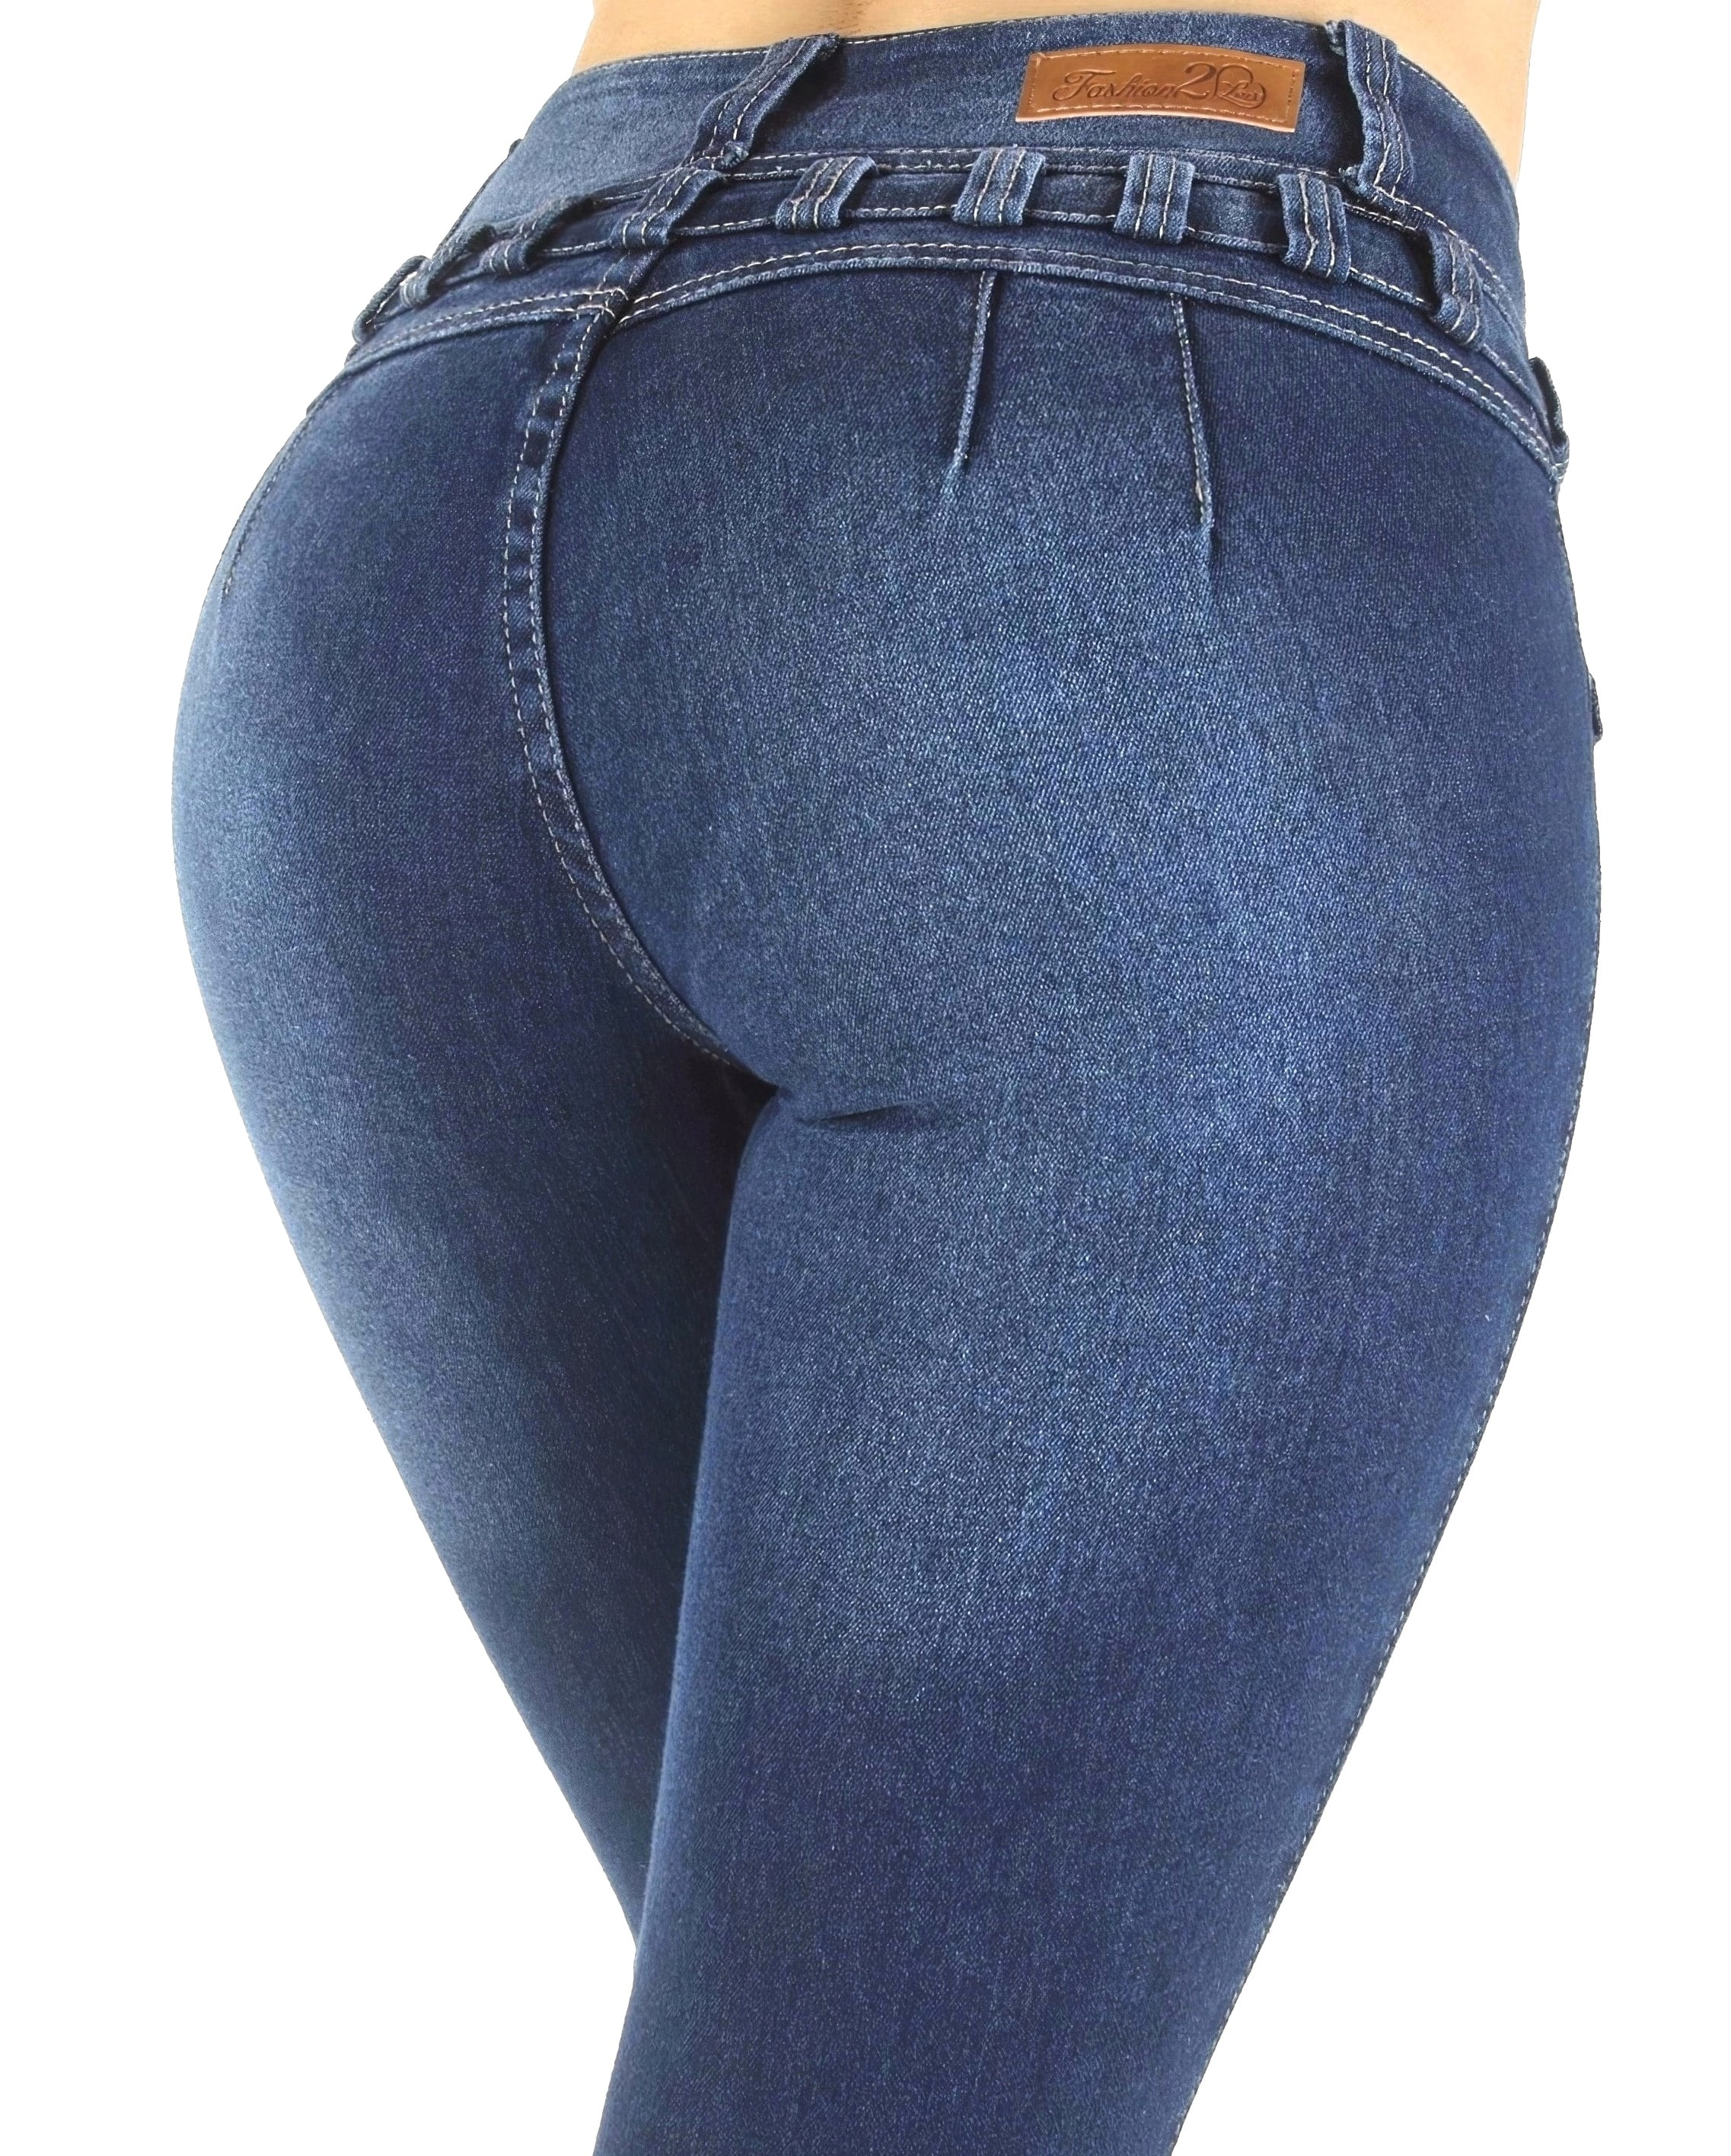 EOWO Colombian Skinny Butt Lift Jeans for Women High Waist Pantalones Colombianos Levanta Cola para Mujer 